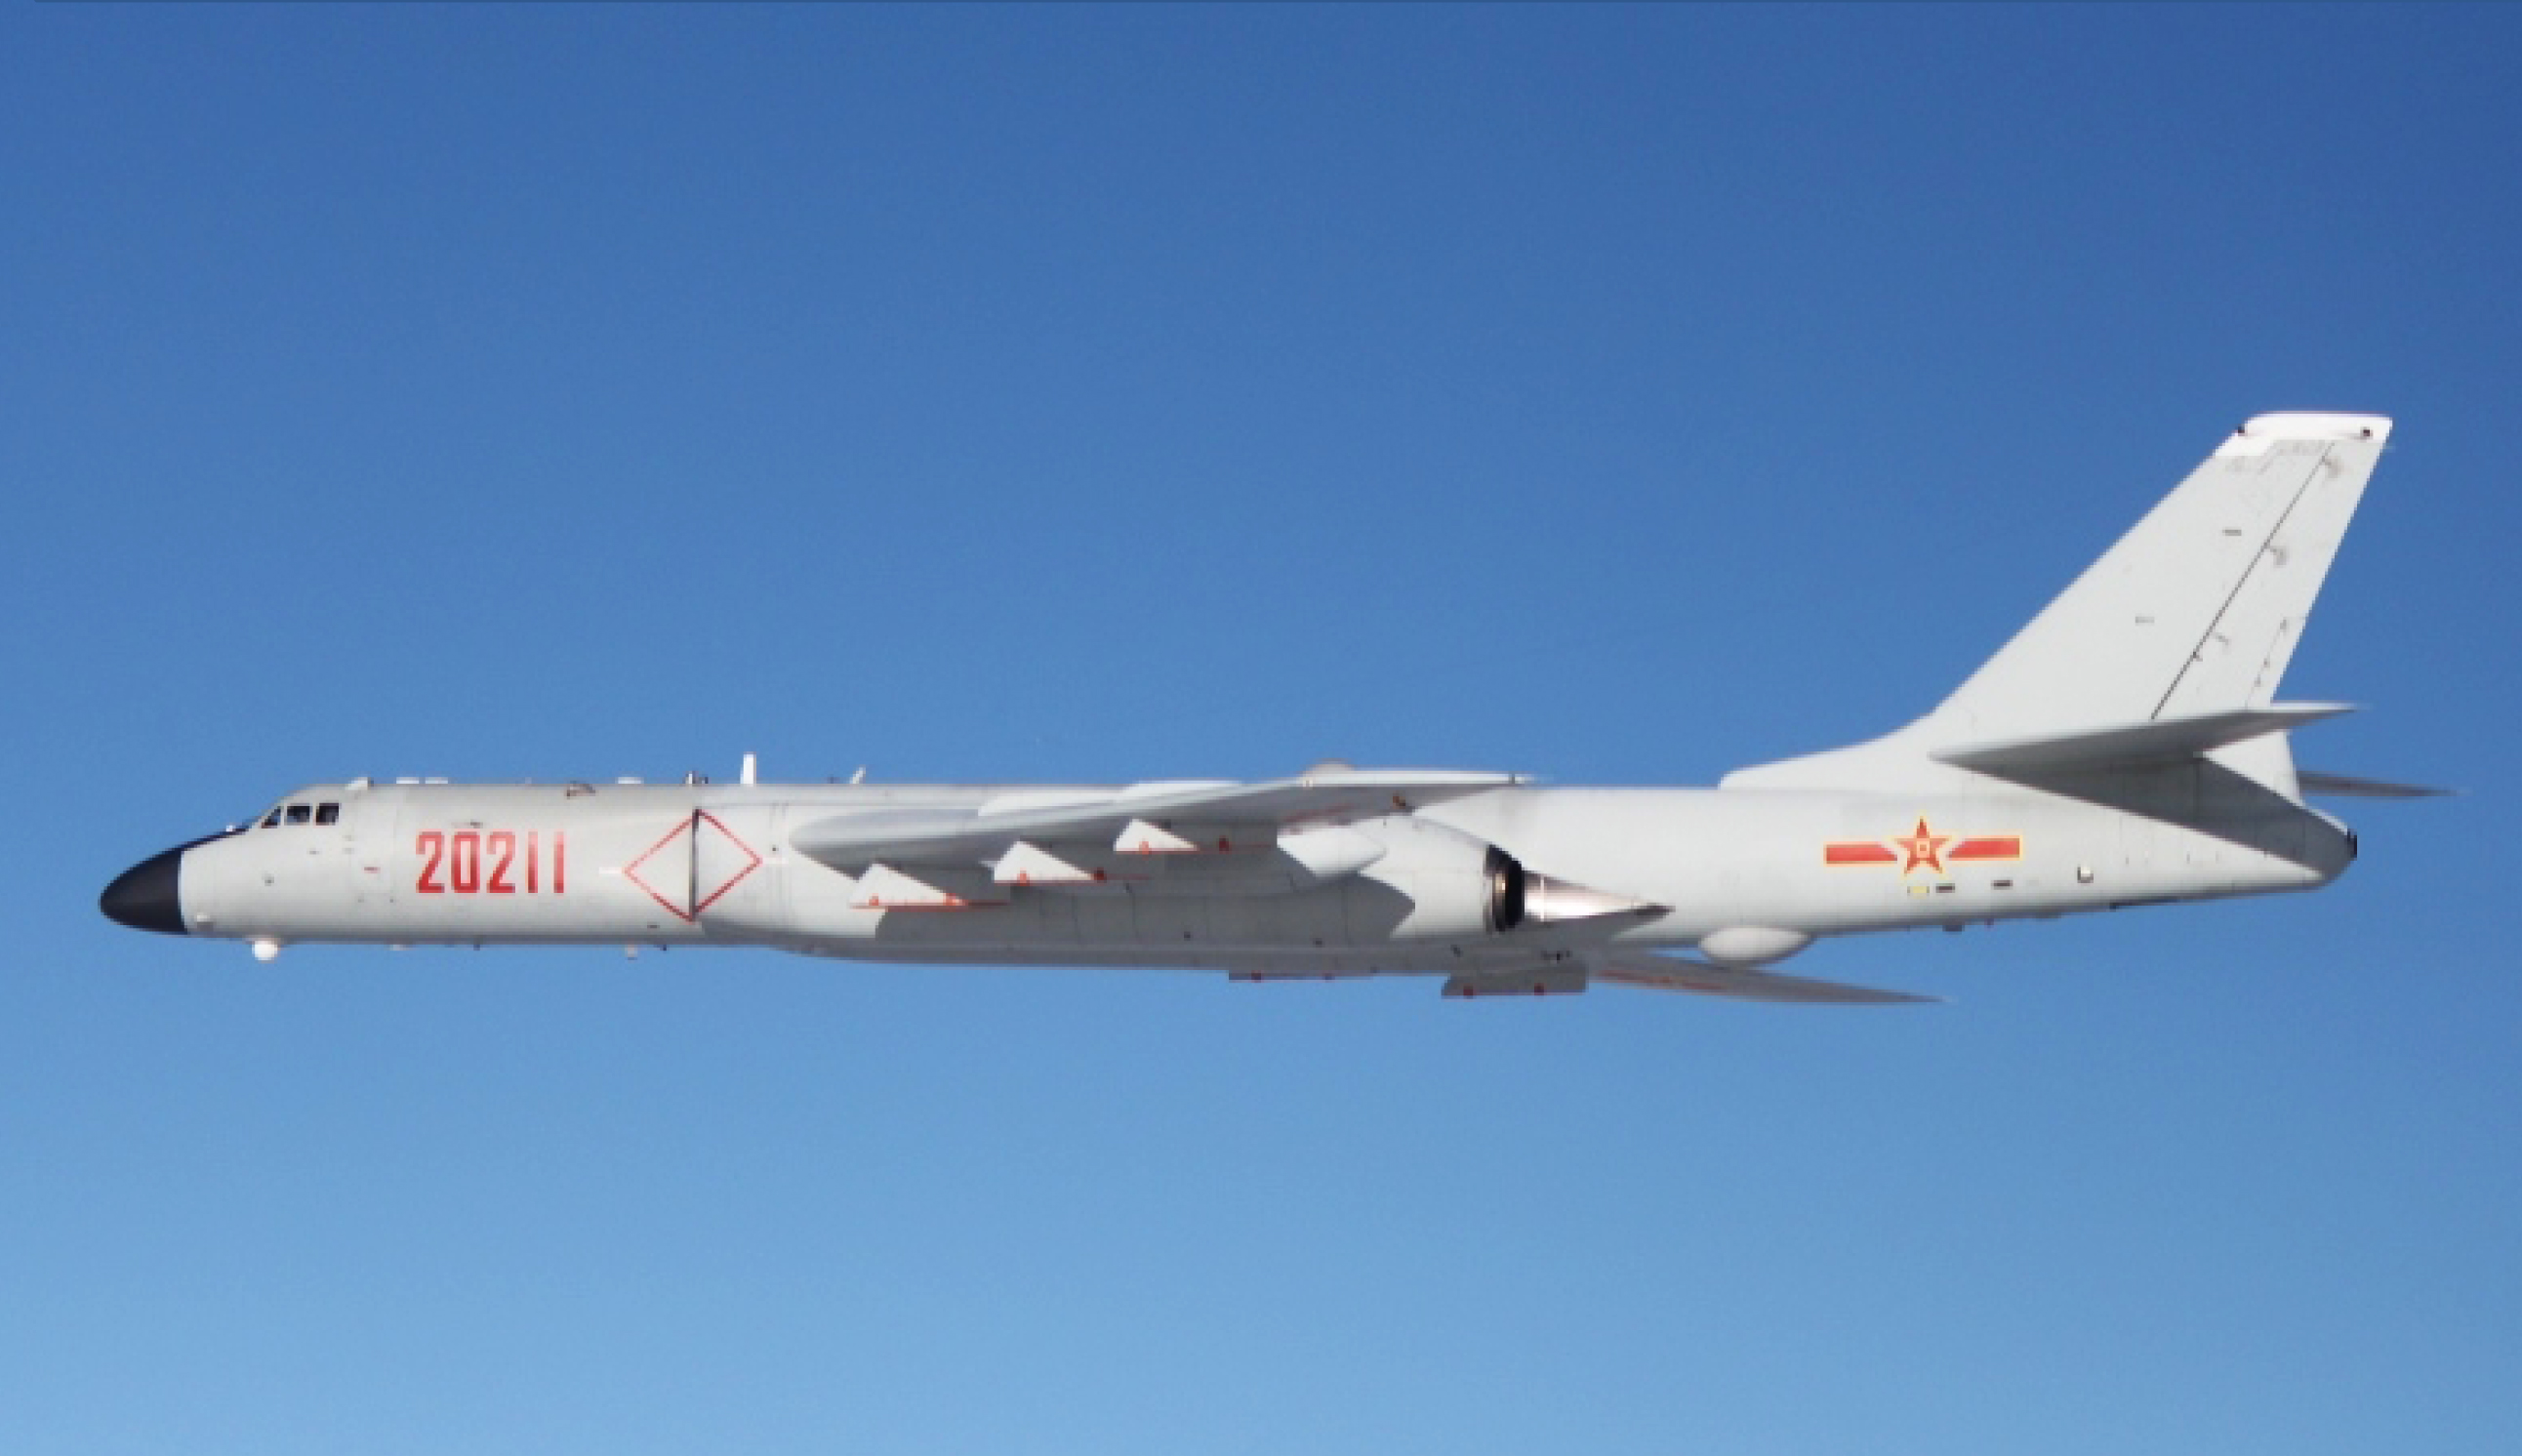  Chinese People's Liberation Army Air Force H6-K bomber in flight in 2015. Image Source: Japan Ministry of Defense